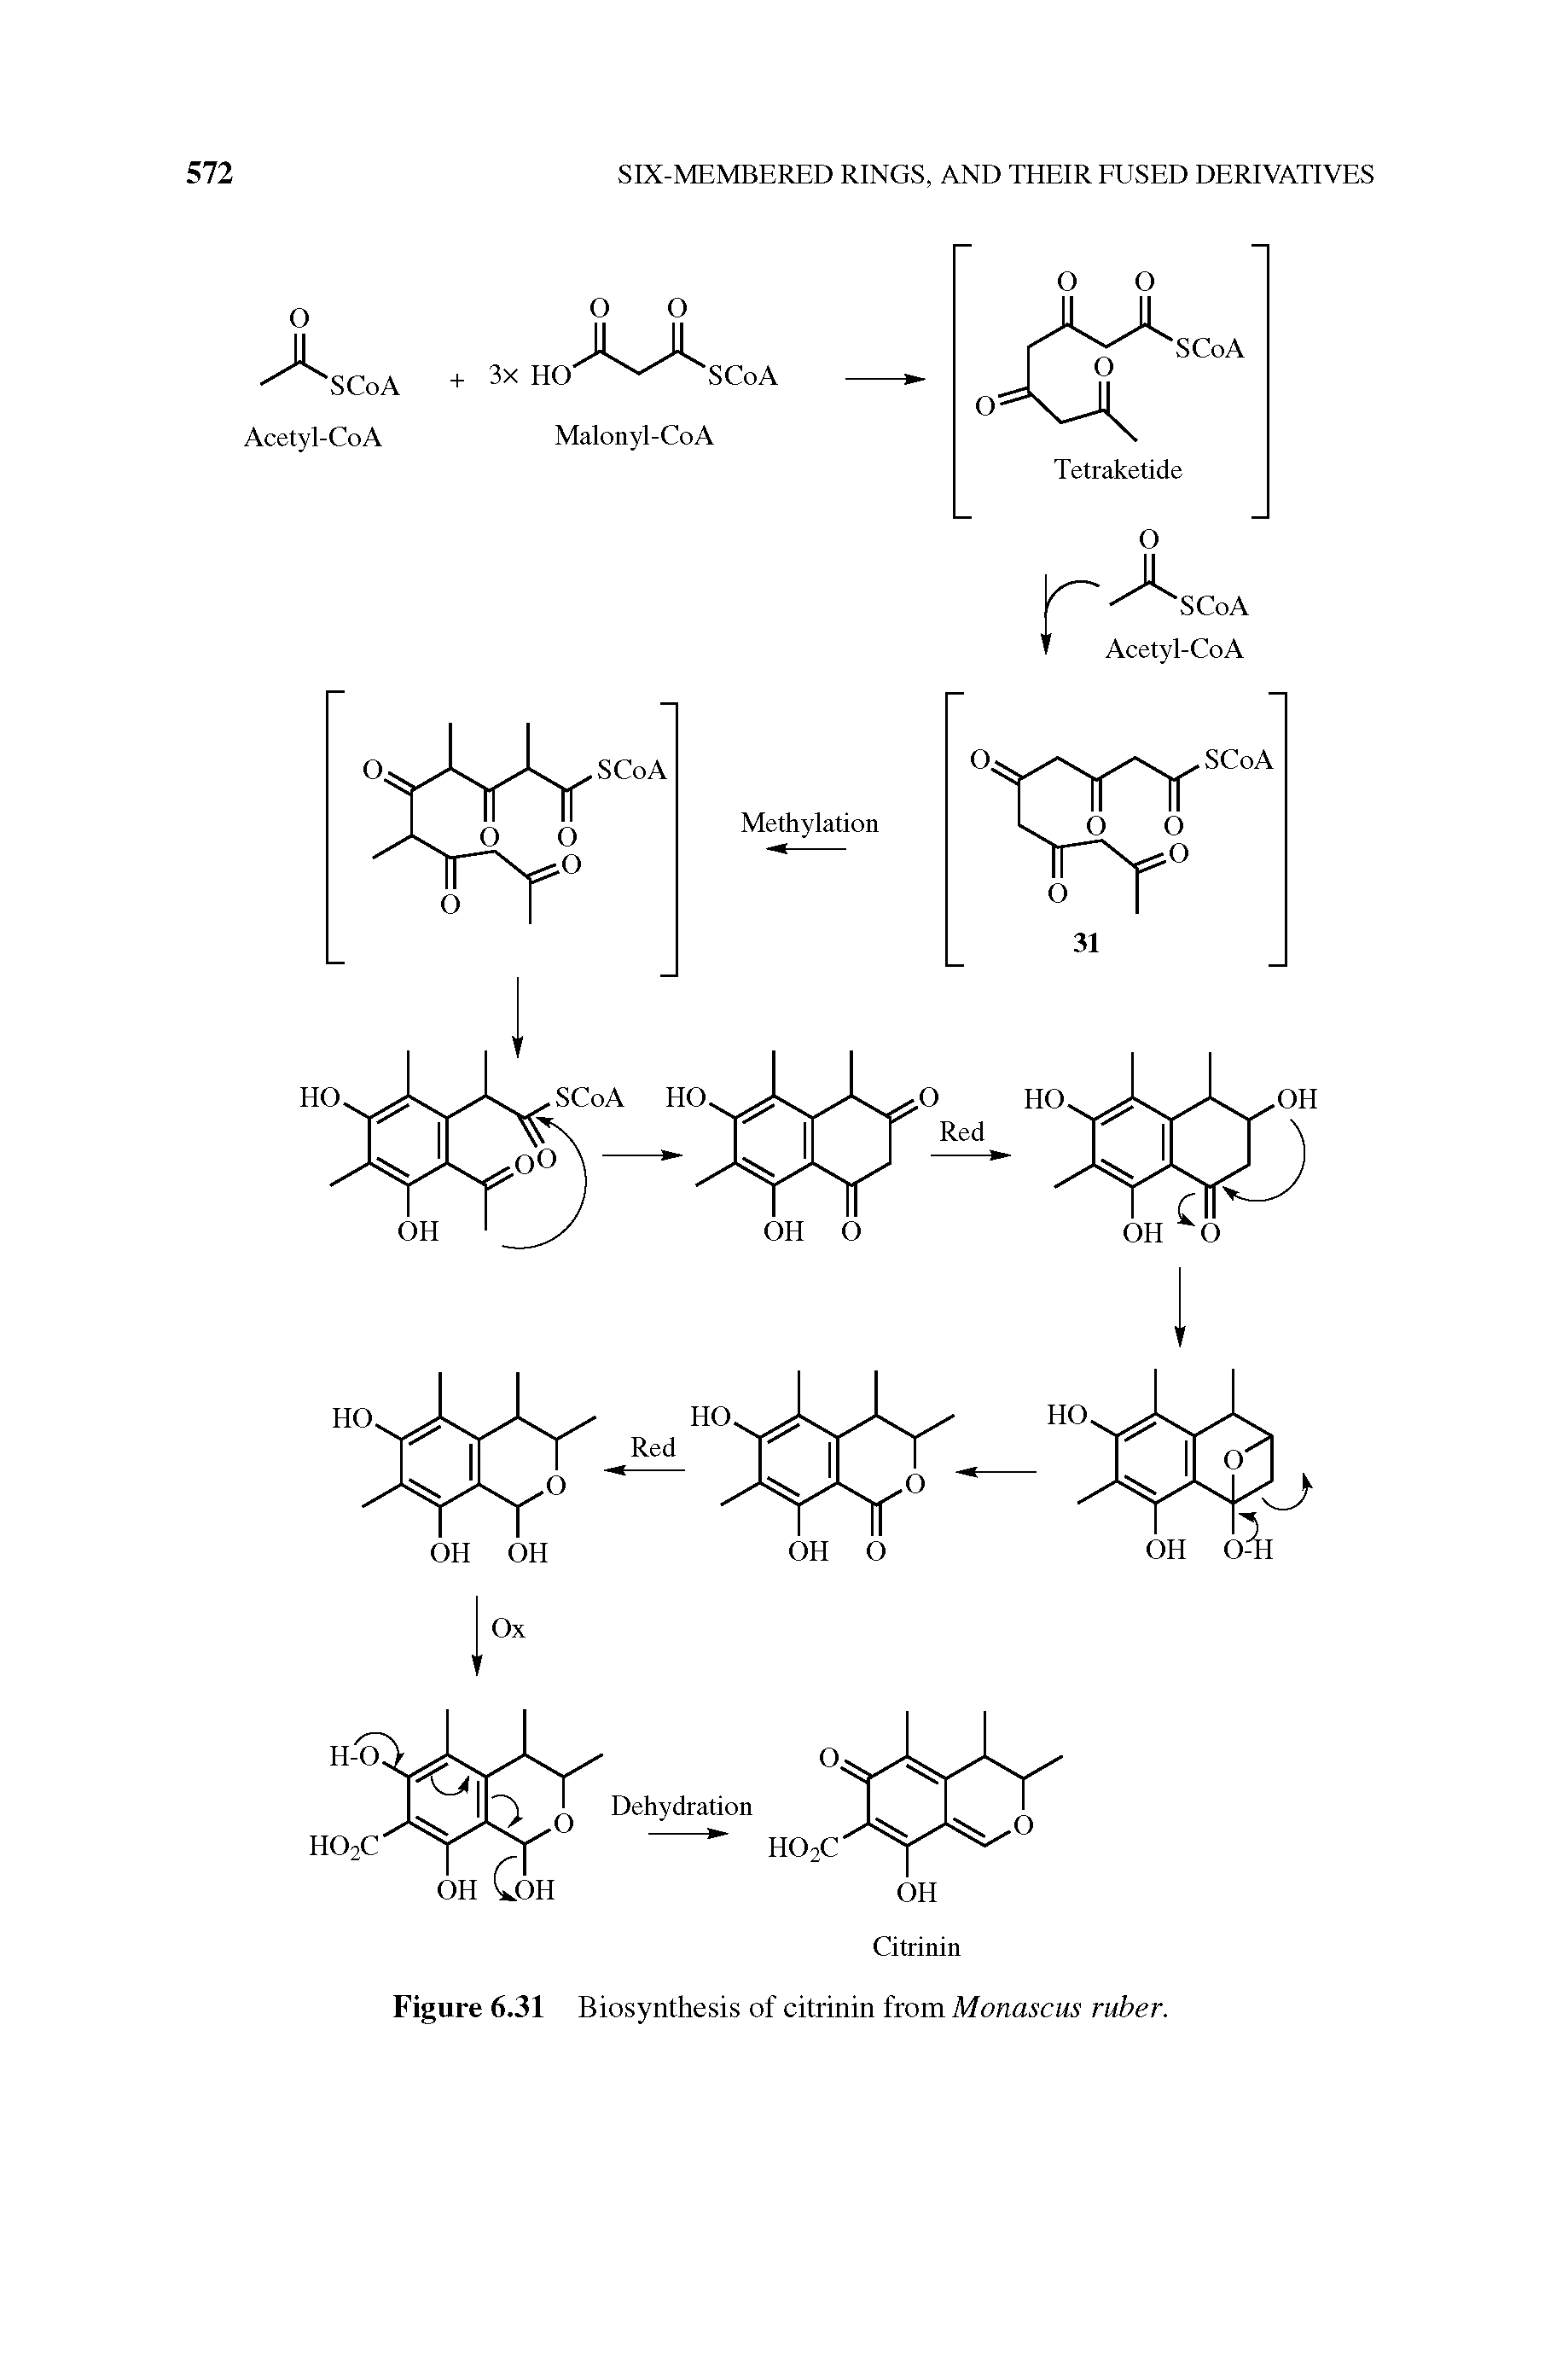 Figure 6.31 Biosynthesis of citrinin from Monascus ruber.